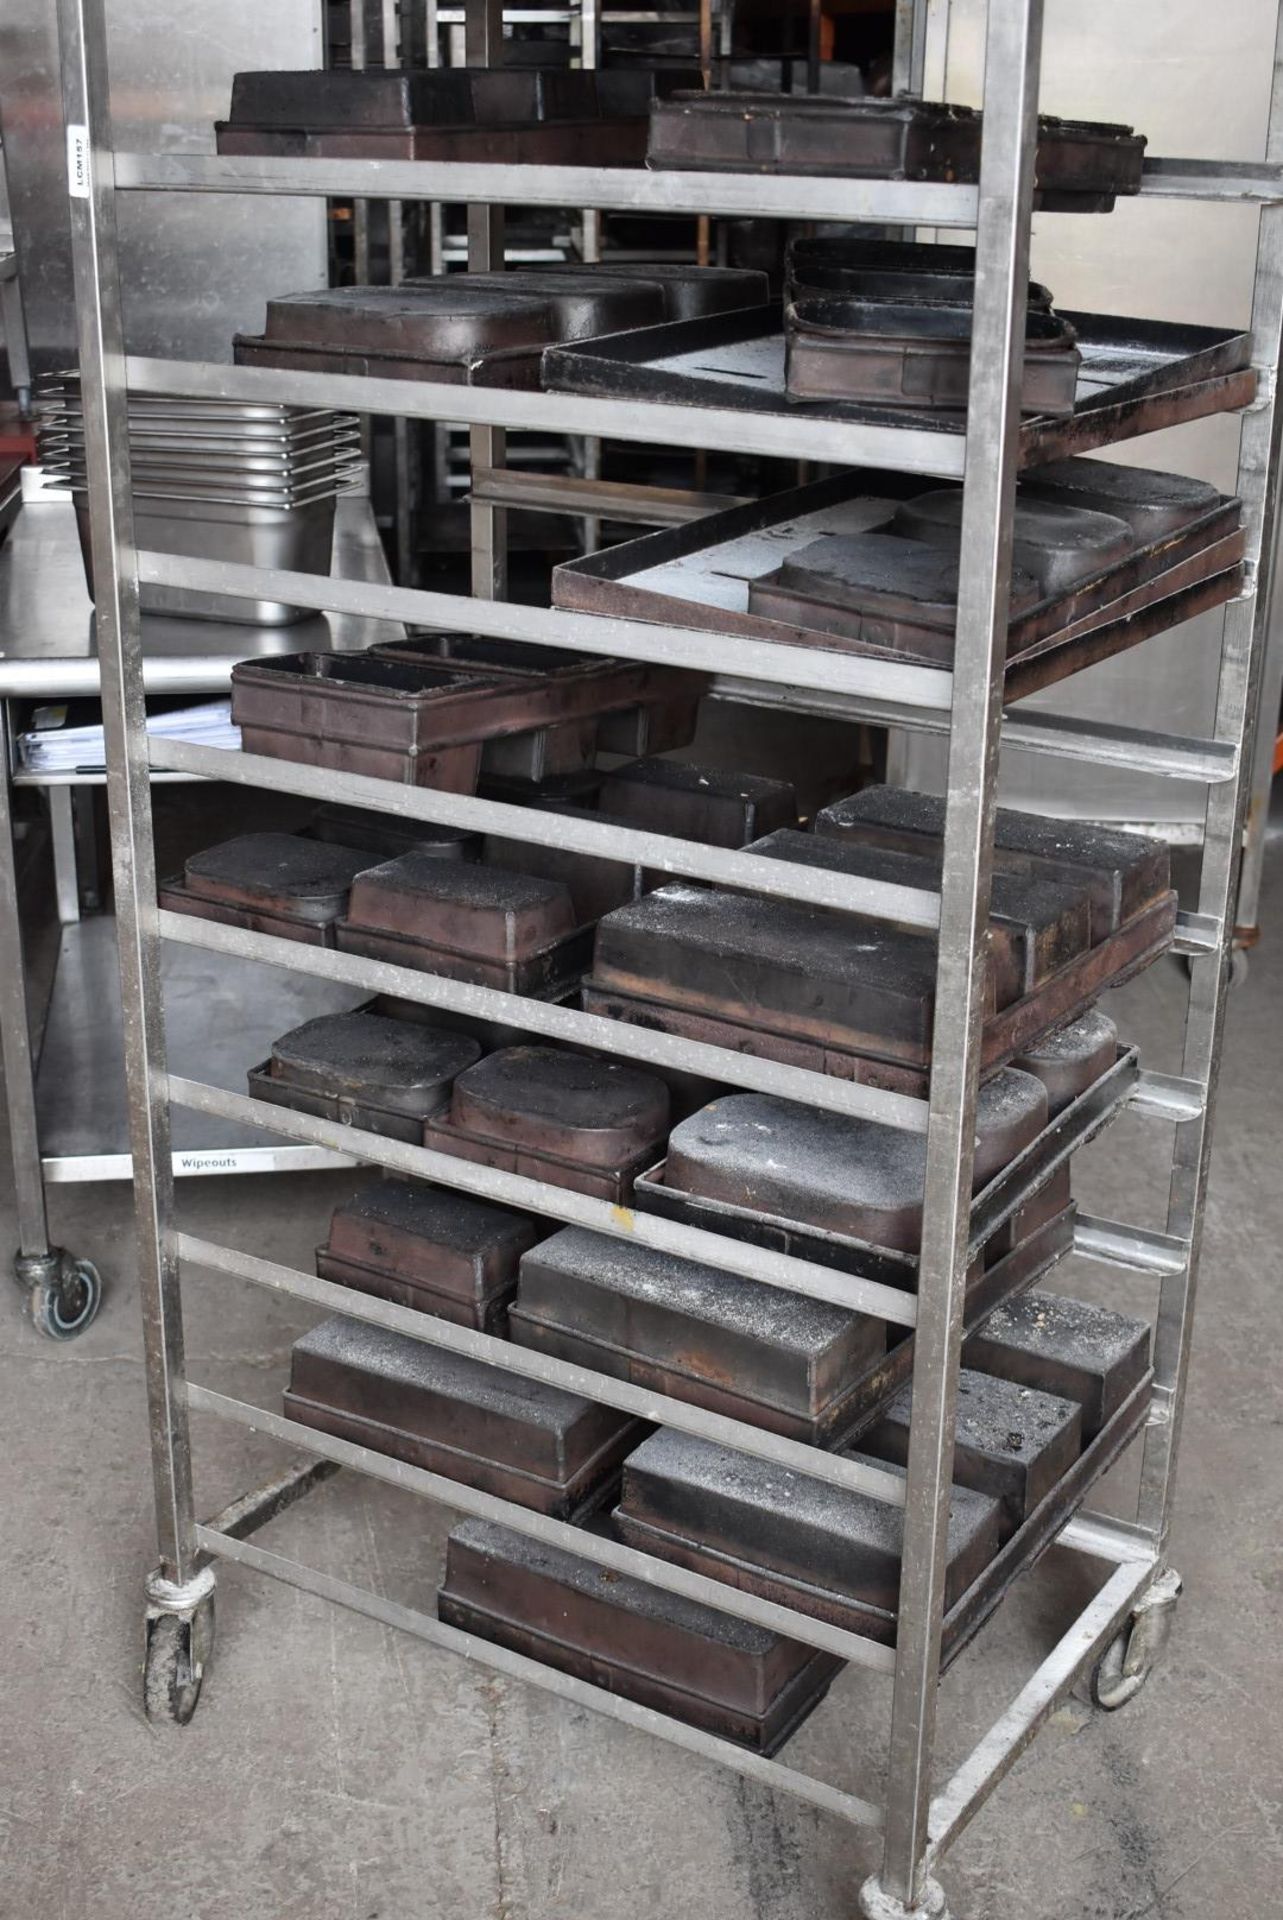 1 x Bakers 11 Tier Mobile Tray Rack With Various Bread Baking Trays - Stainless Steel With Castors - - Image 2 of 8